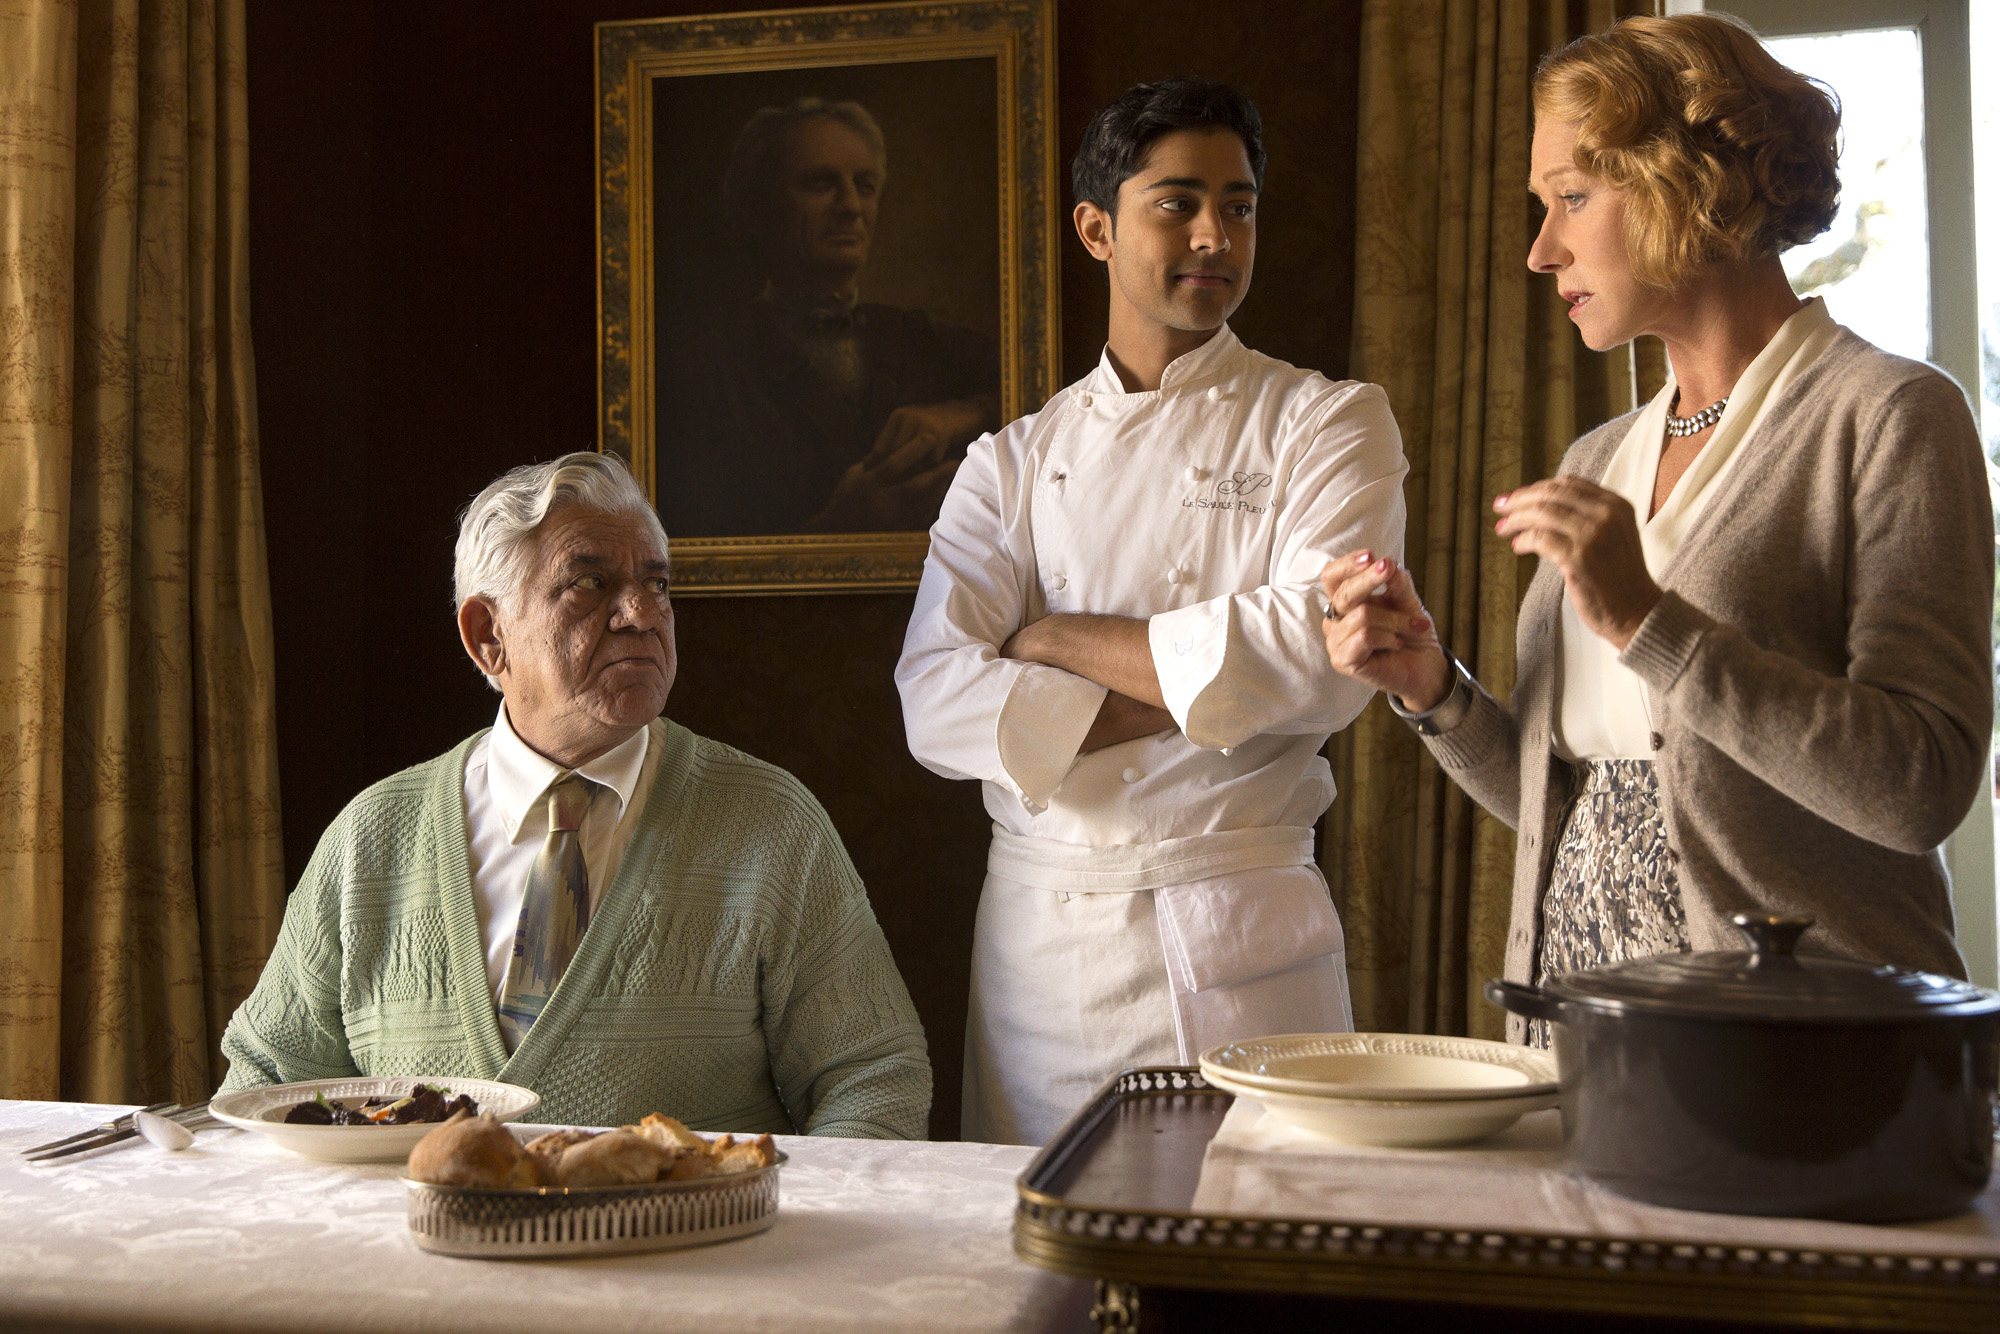 This image released by DreamWorks II shows, from left, Om Puri, Manish Dayal and Helen Mirren in a scene from The Hundred-Foot Journey. (AP Photo/François Duhamel, DreamWorks II)